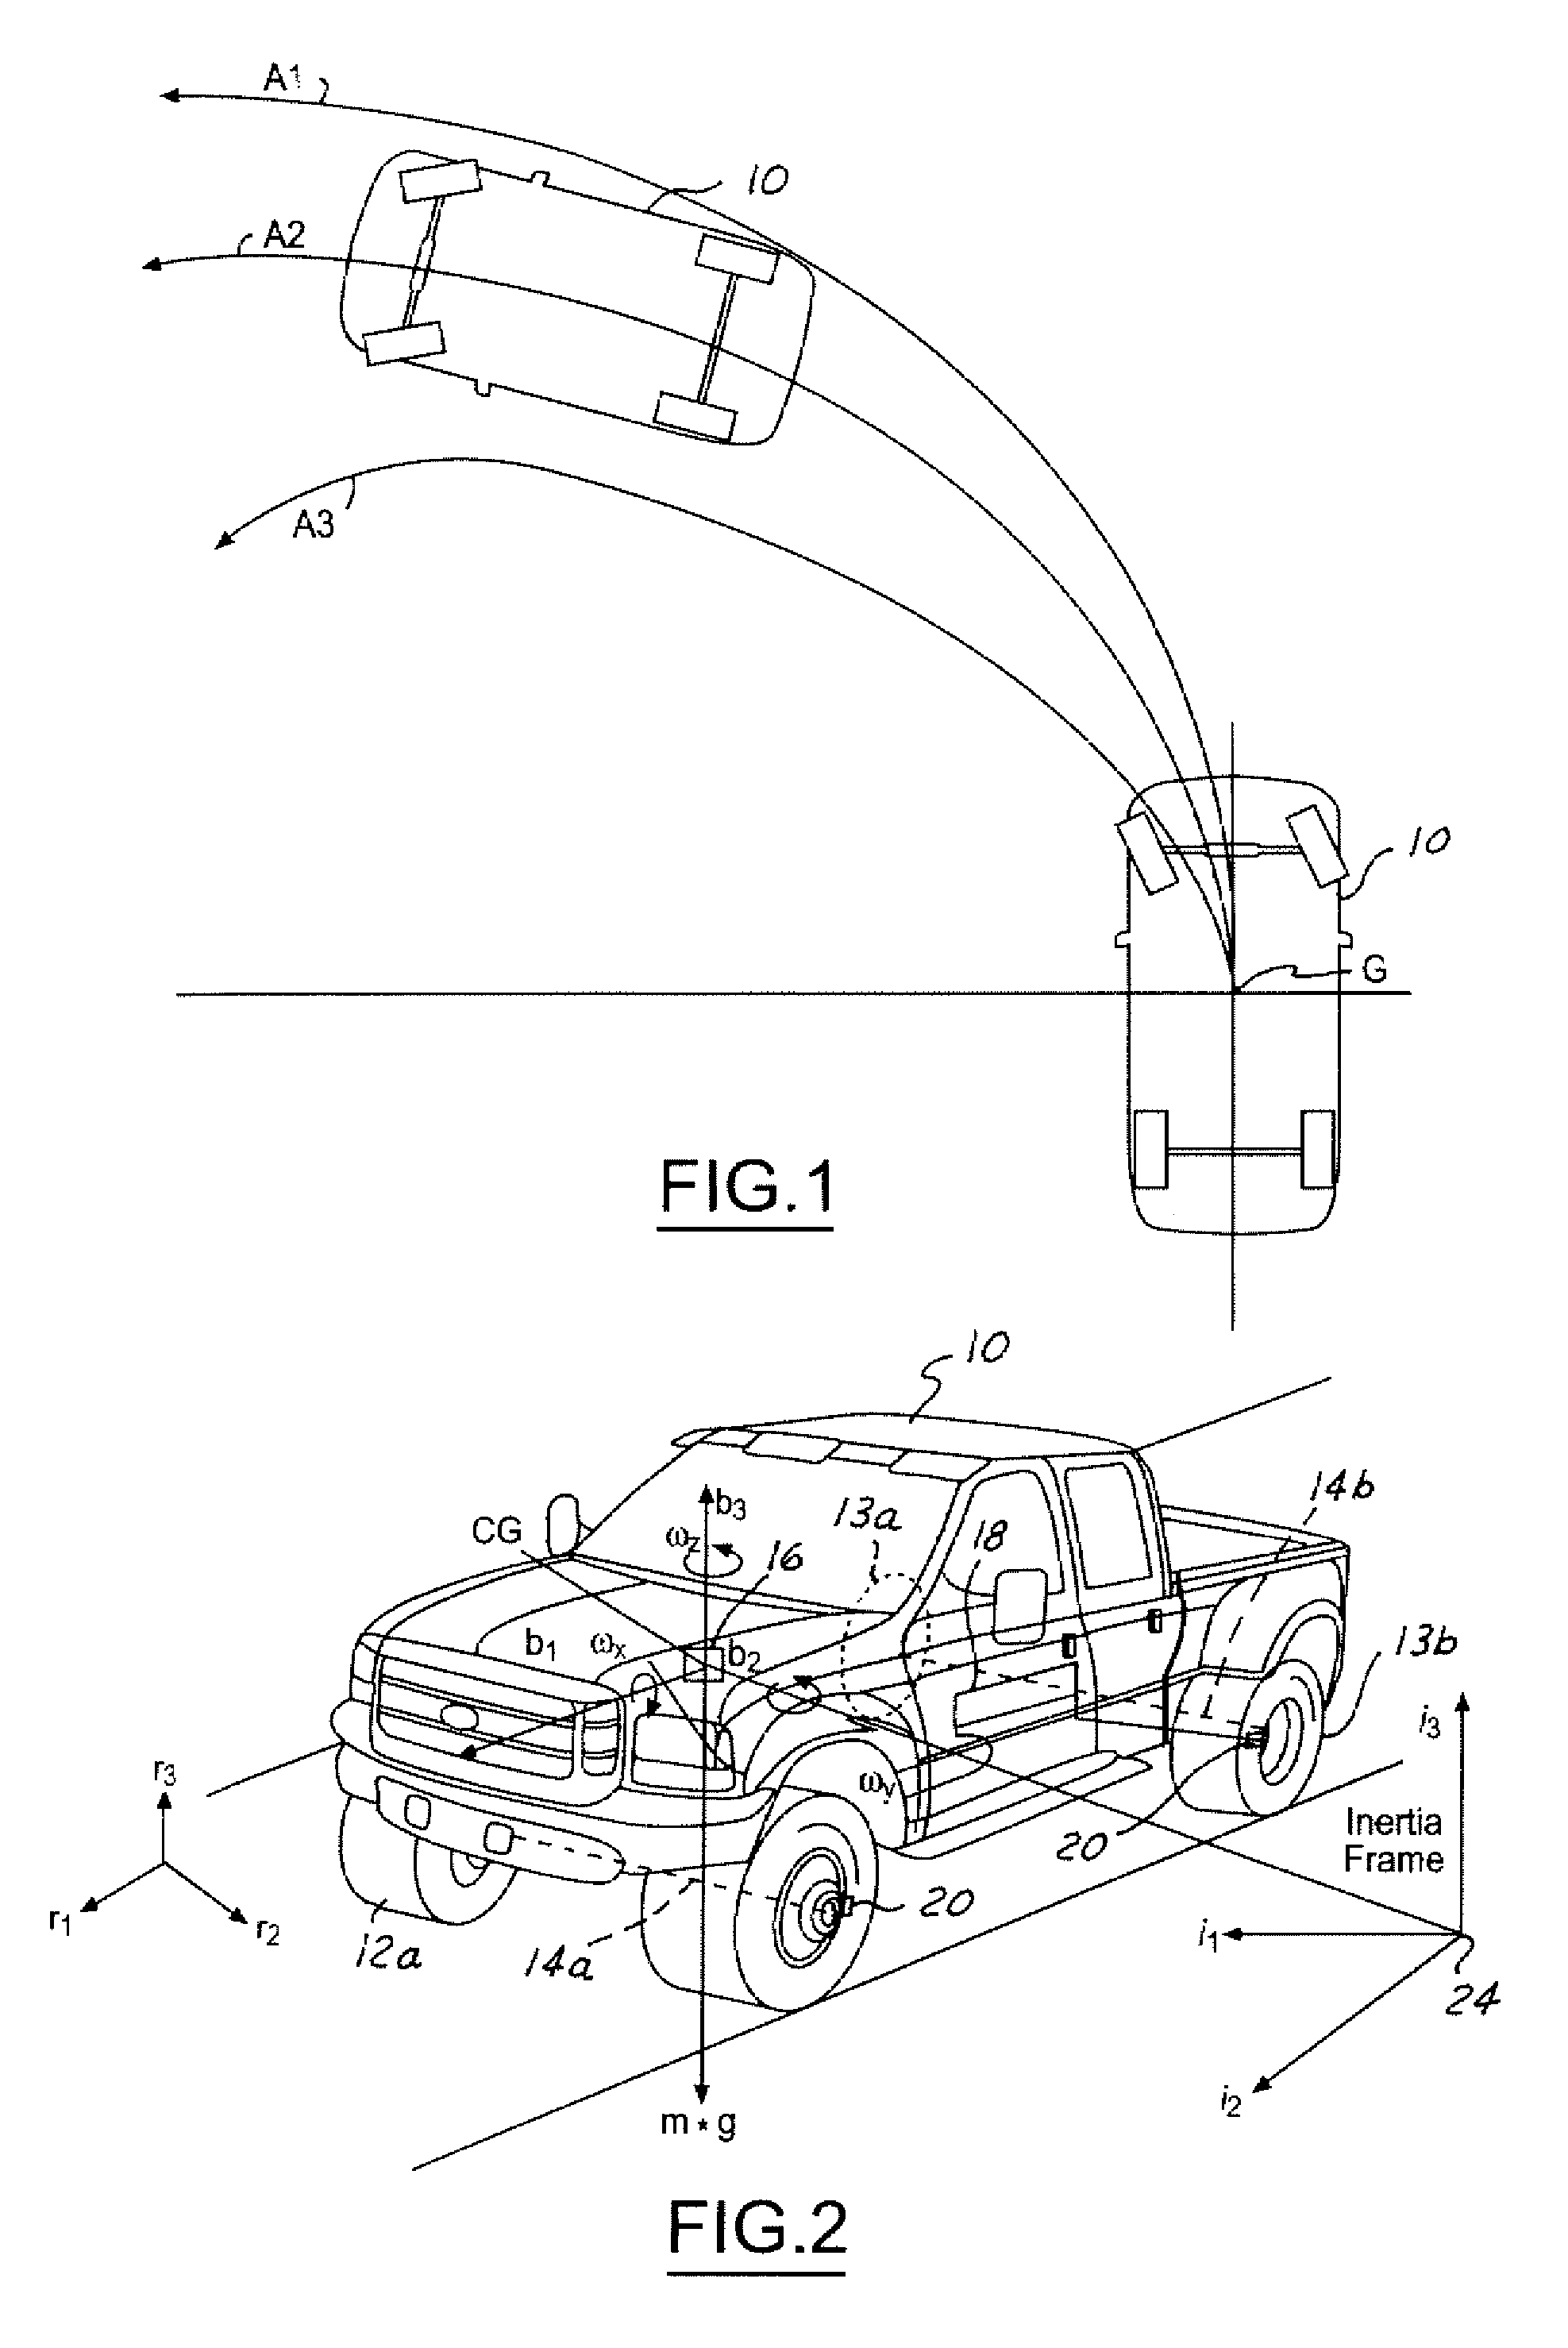 Method and apparatus for controlling an automotive vehicle using brake-steer and normal load adjustment